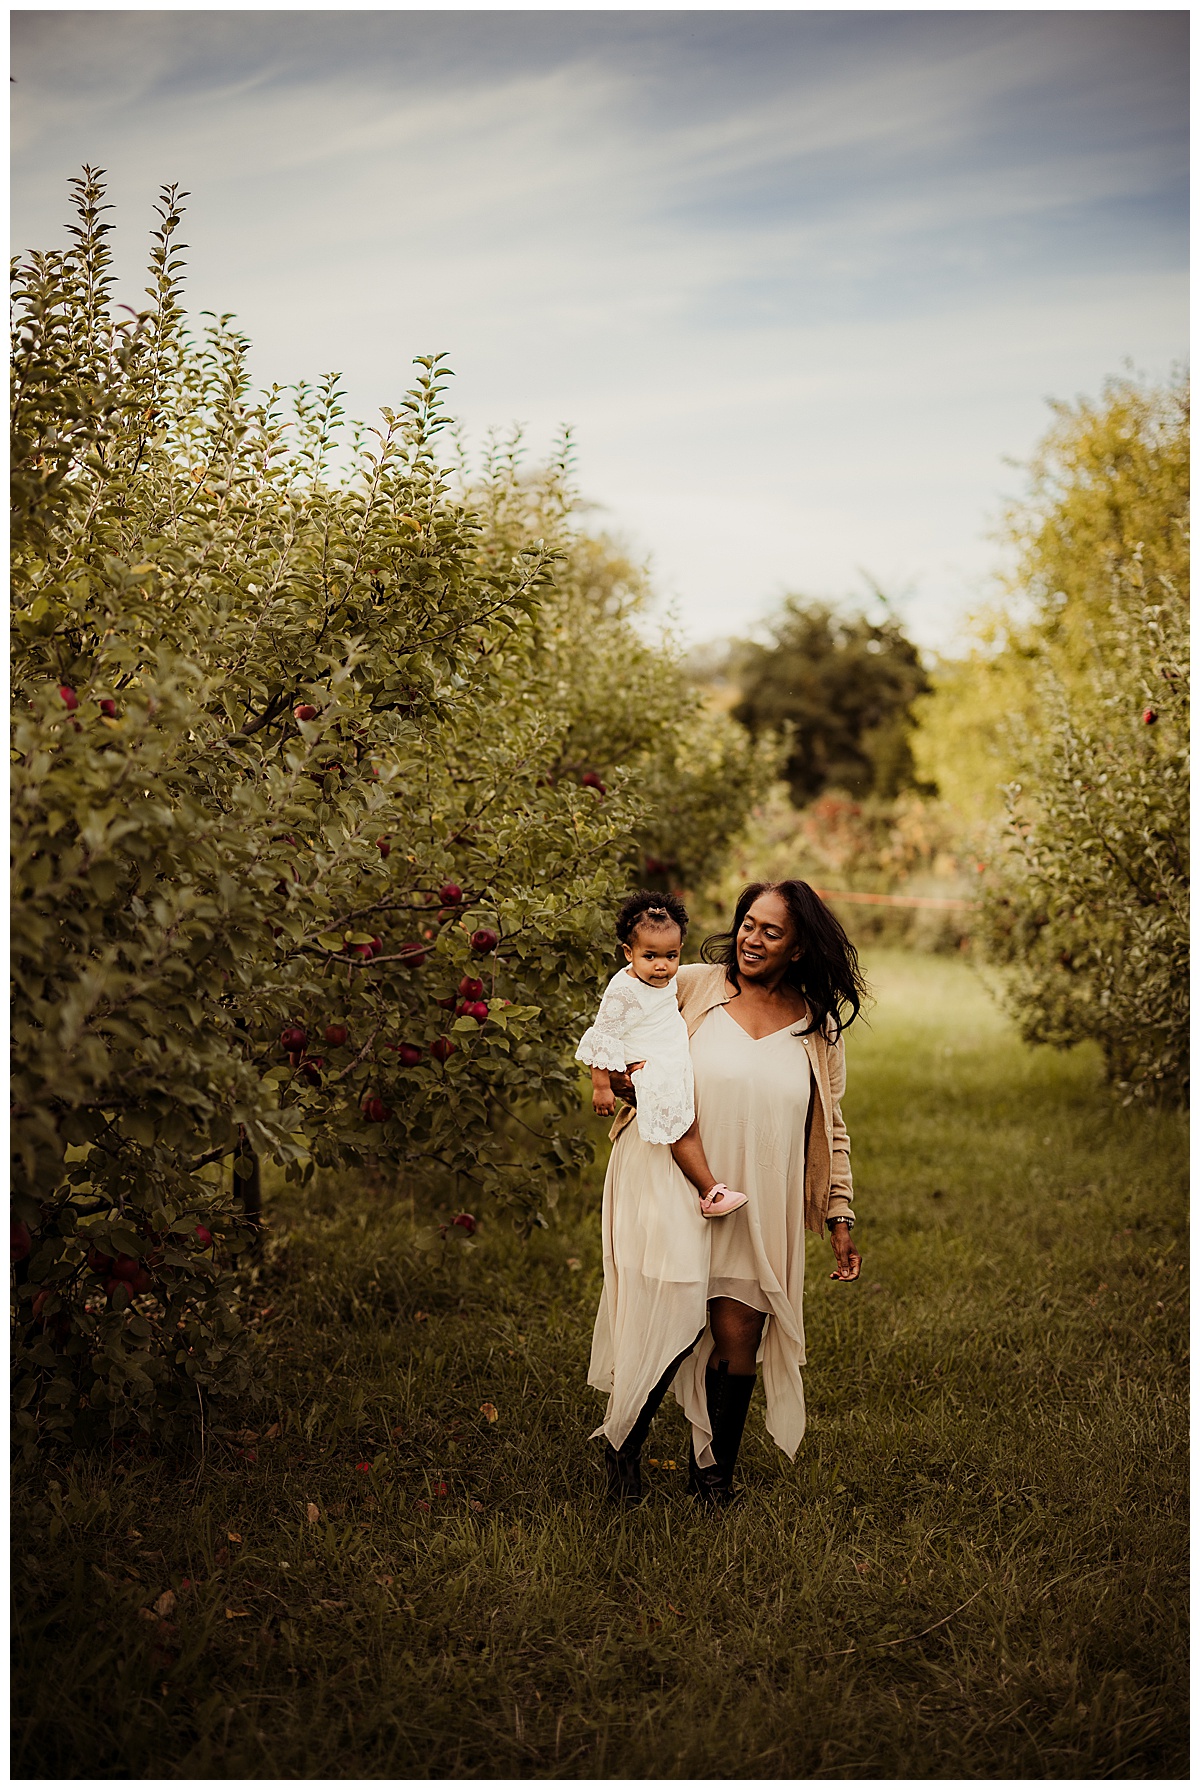 Mom holds young daughter for Outdoor Adventure Golden Hour Session at Great Country Farms